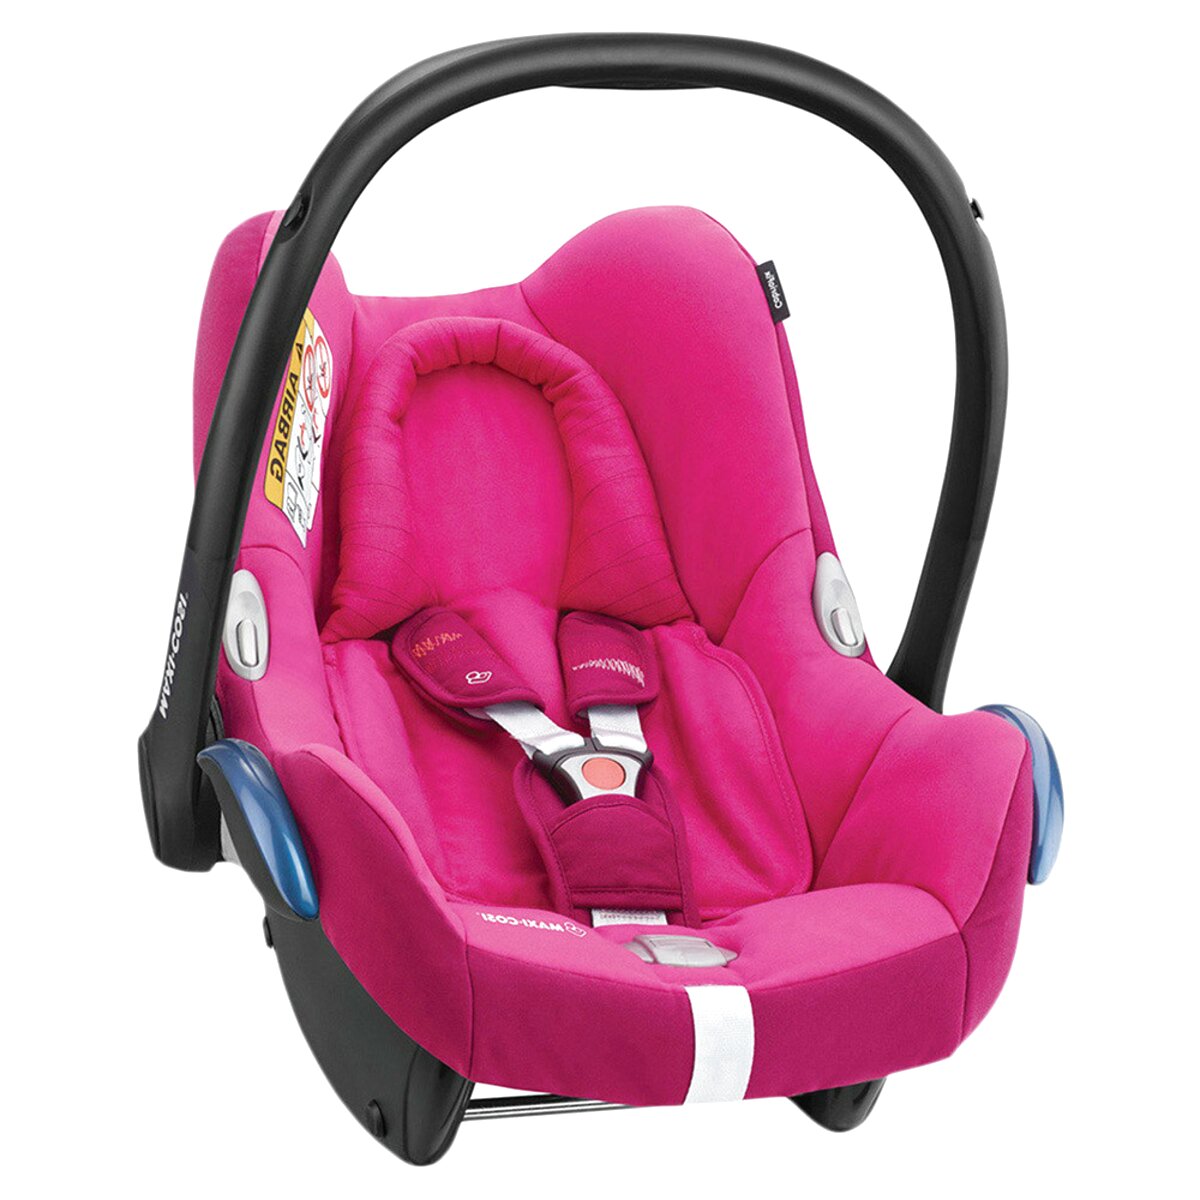 Maxi Cosi Cabriofix Pink for sale in UK | View 67 ads